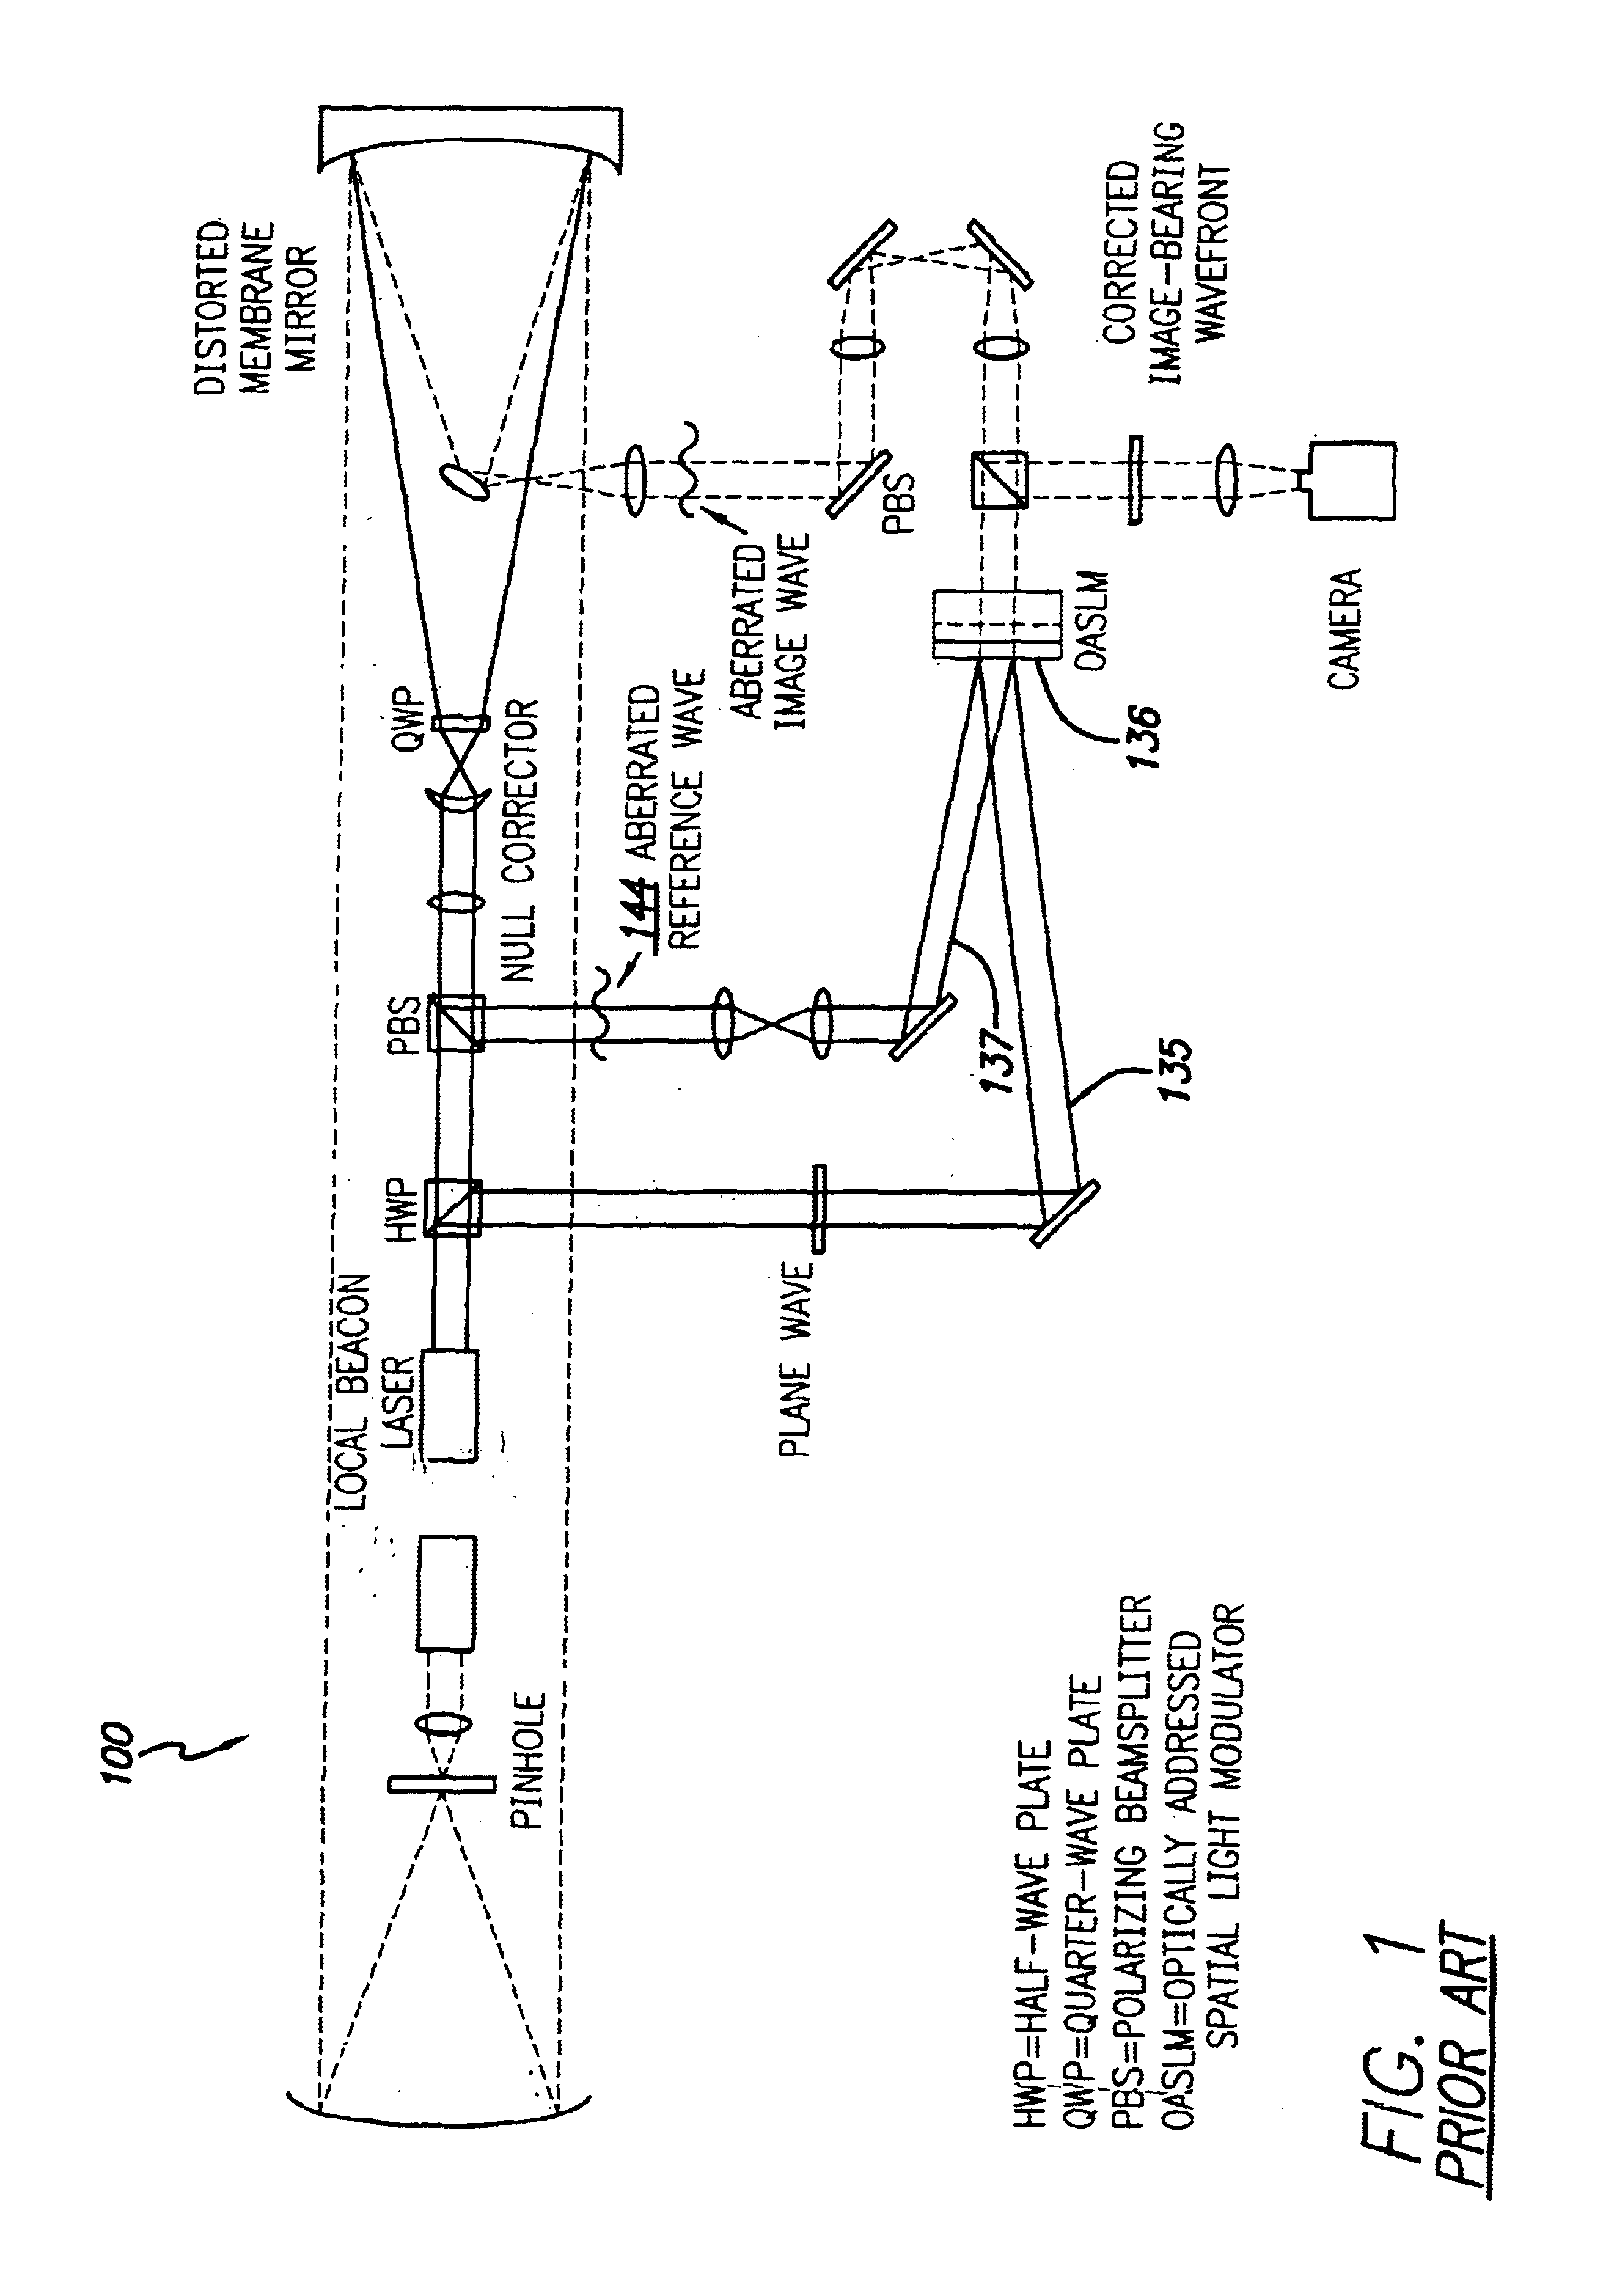 System and method for effecting high-power beam control with outgoing wavefront correction utilizing holographic sampling at primary mirror, phase conjugation, and adaptive optics in low power beam path